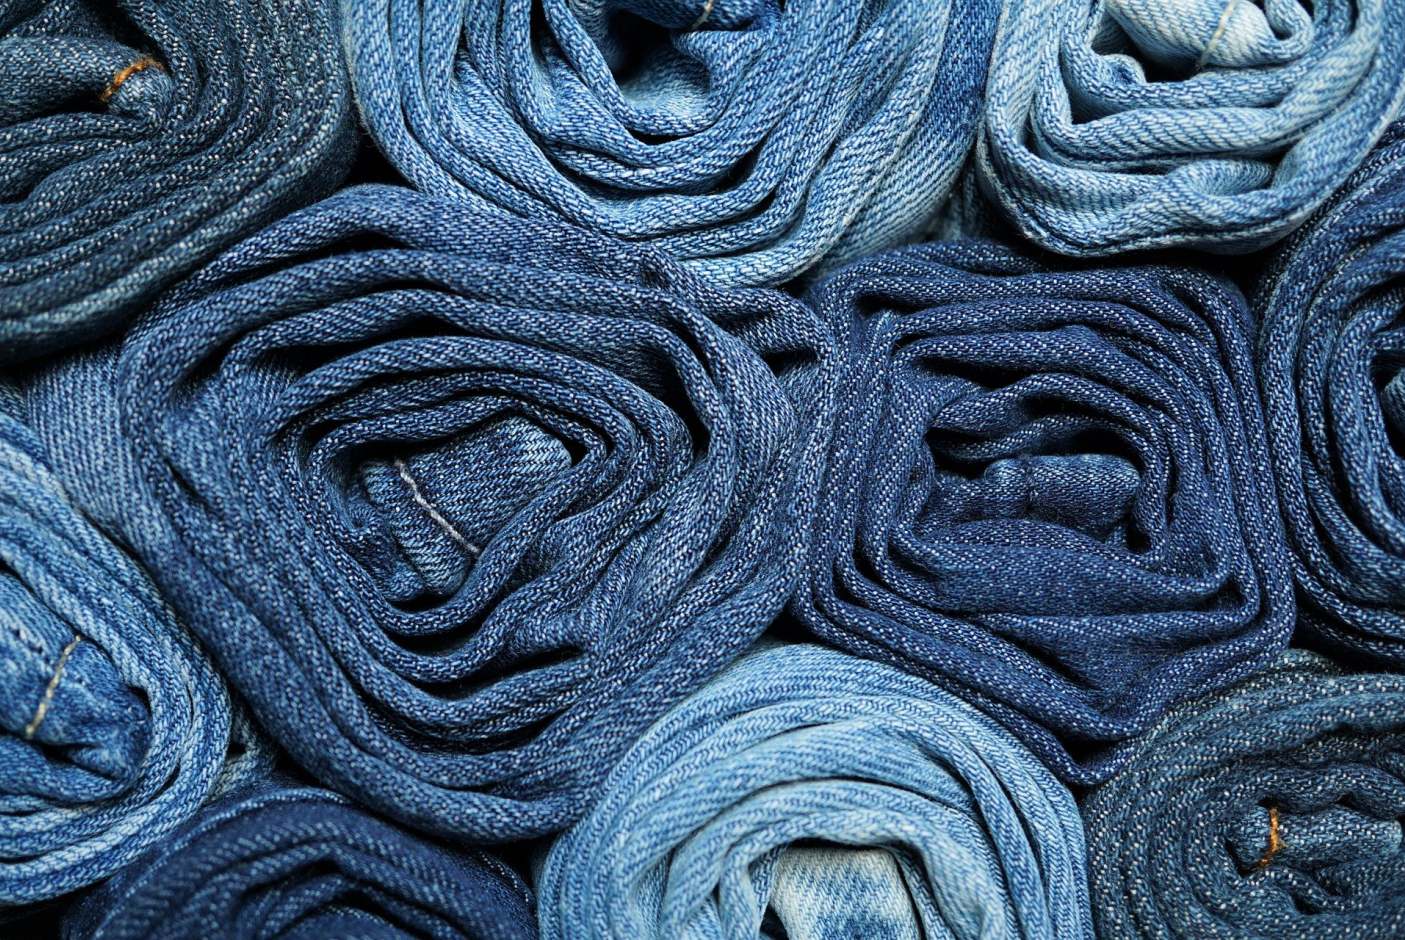 Denim Club India - Pursuing Sustainability, Genuinely! Sustainability is at  the core of the handloom denim initiative by Denim Club. We make sure that  we comprehensively take care of all the three